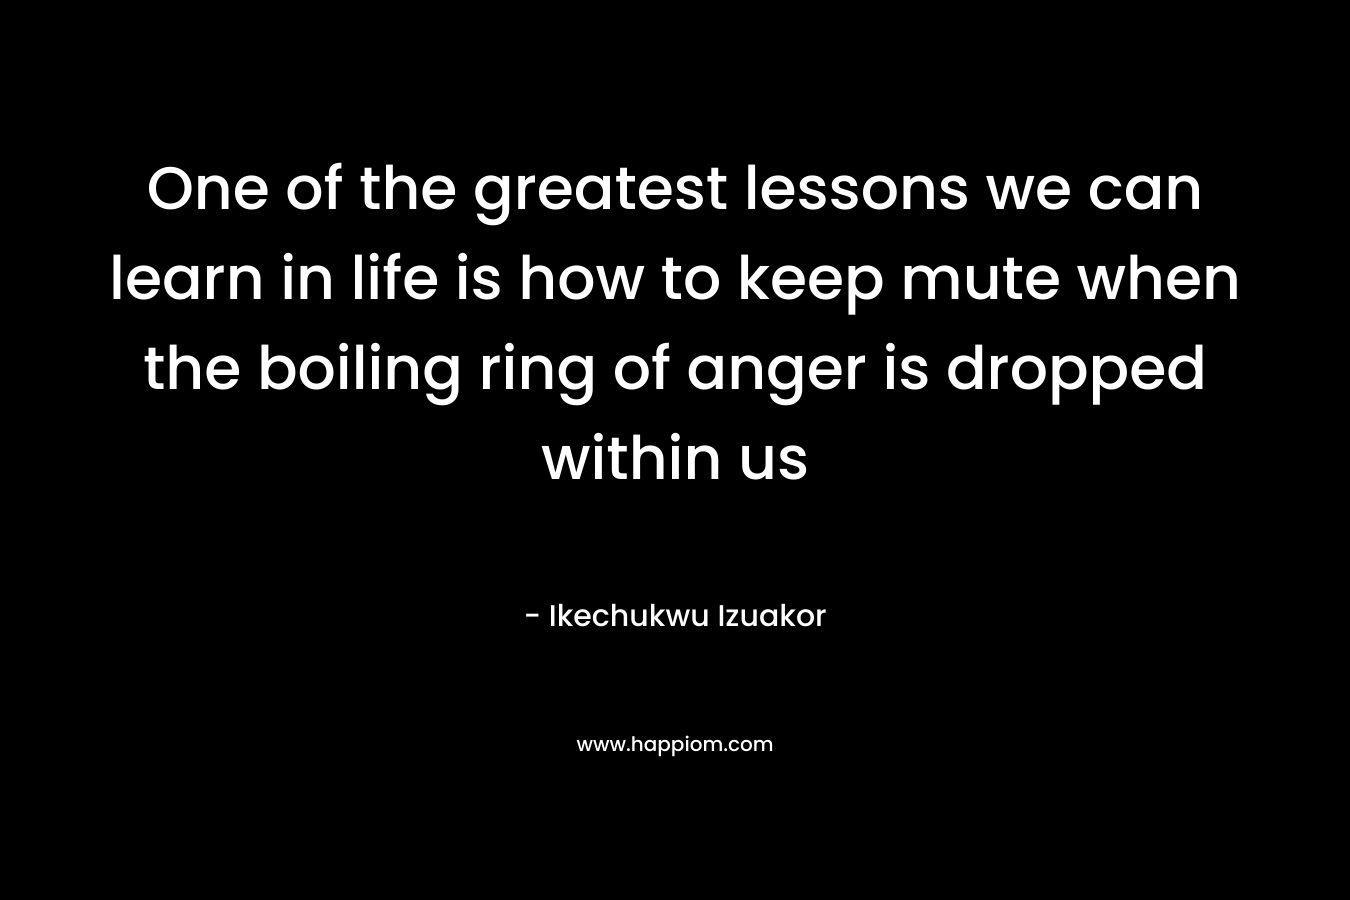 One of the greatest lessons we can learn in life is how to keep mute when the boiling ring of anger is dropped within us – Ikechukwu Izuakor